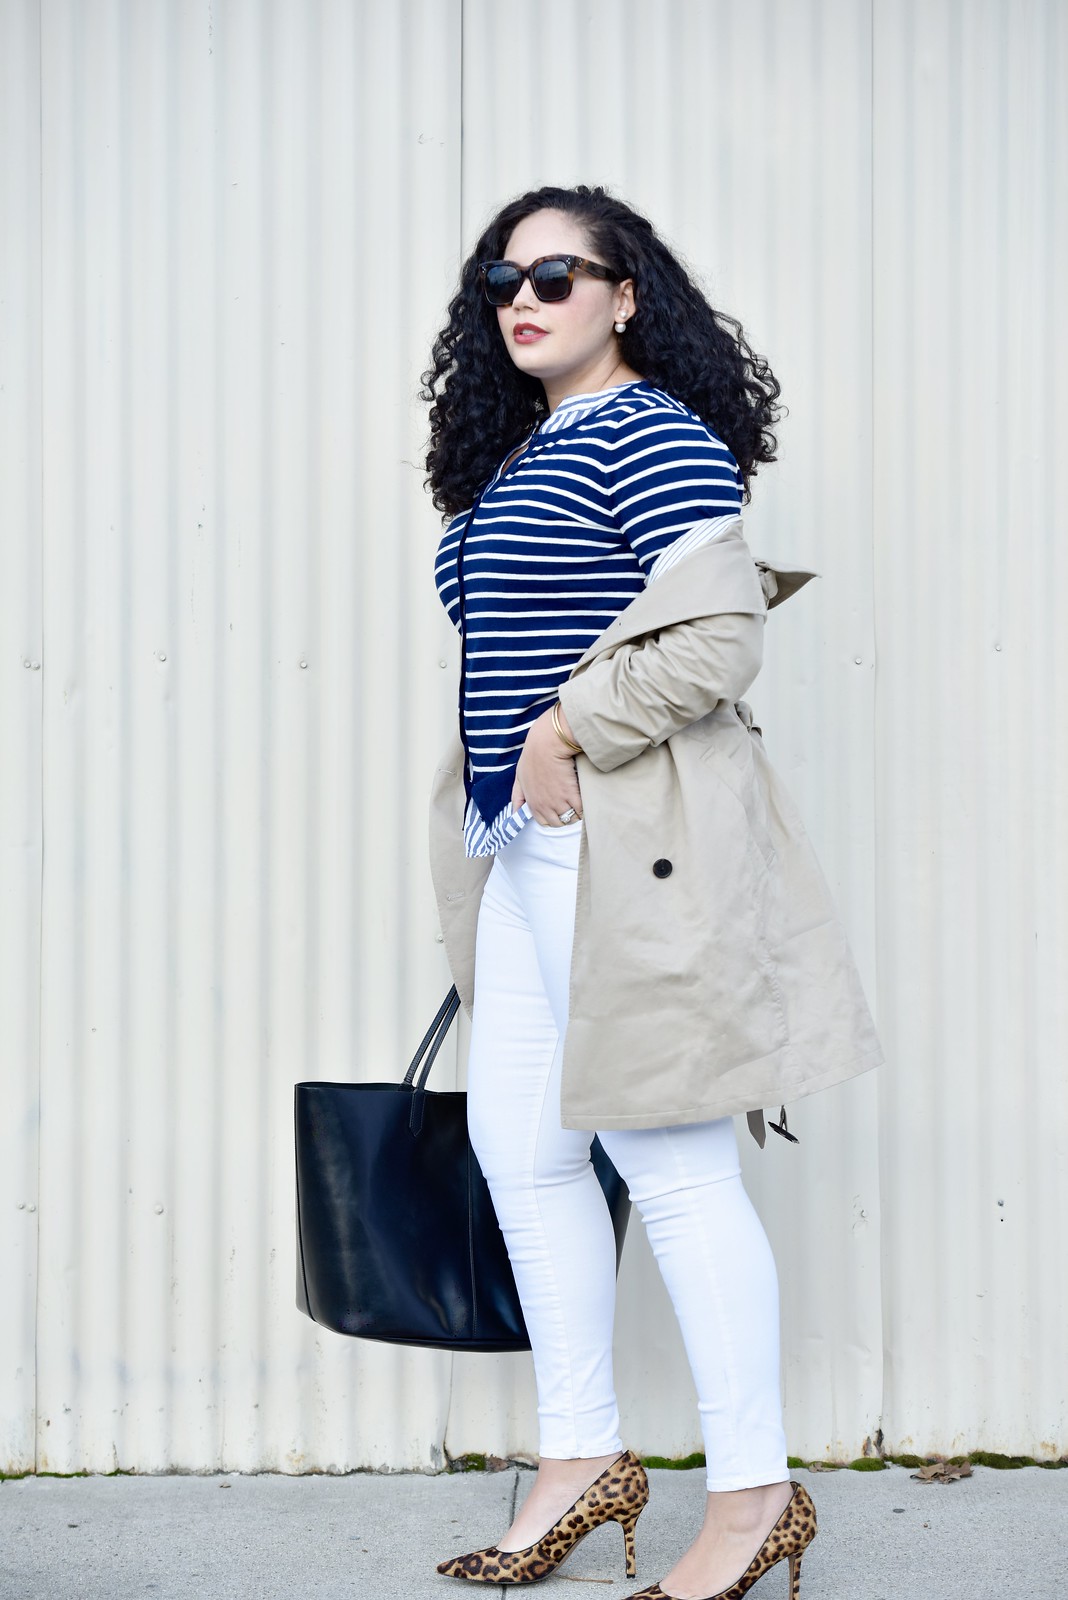 How to Wear White Jeans with Confidence via @GirlWithCurves #style #tips #fashion #skinny #jeans #white #summer